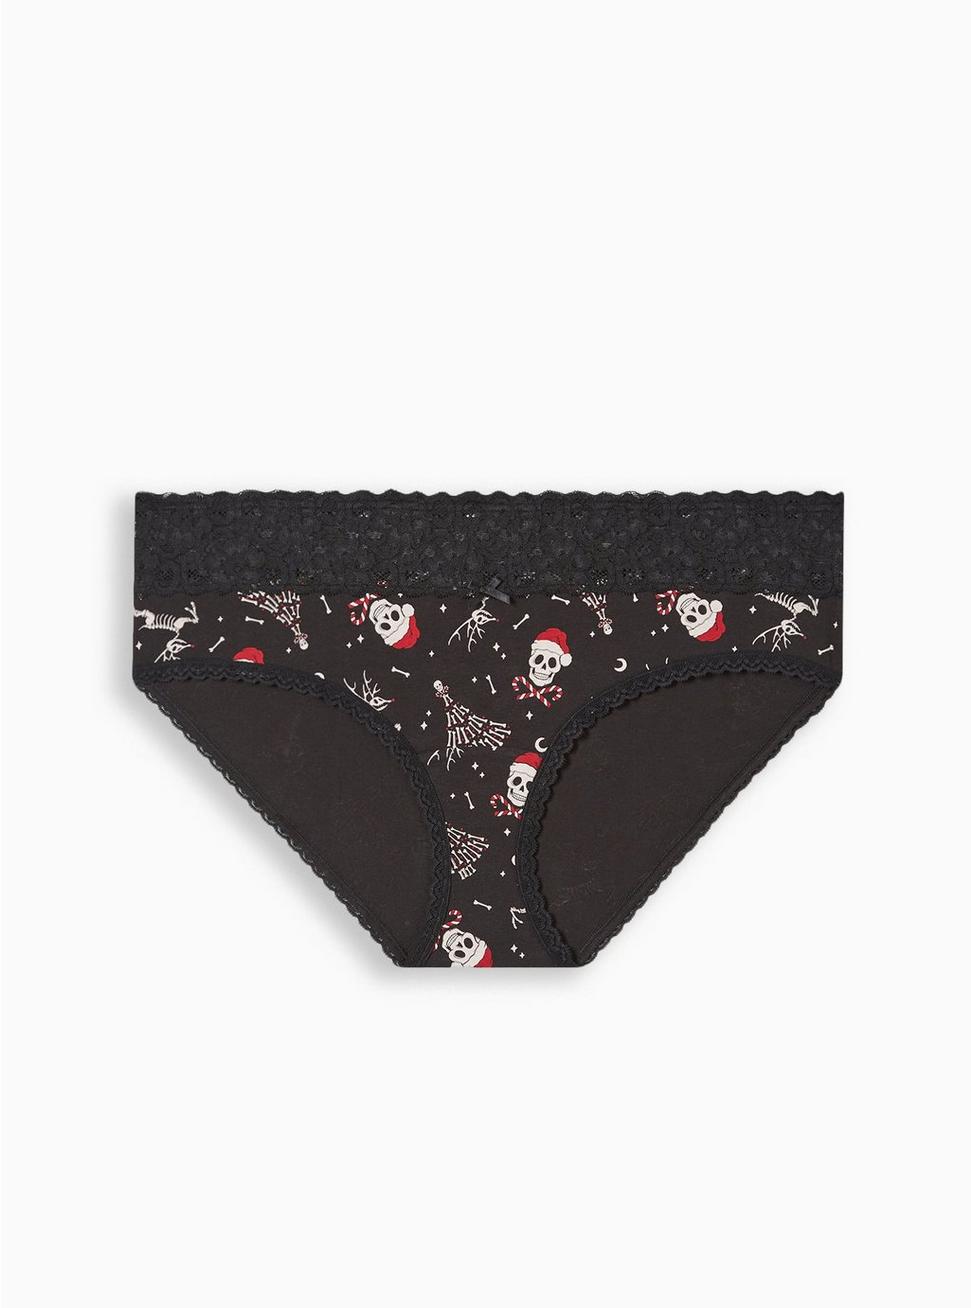 Cotton Mid-Rise Hipster Lace Trim Panty, NIGHT TERROR CHRISTMAS BLACK, hi-res